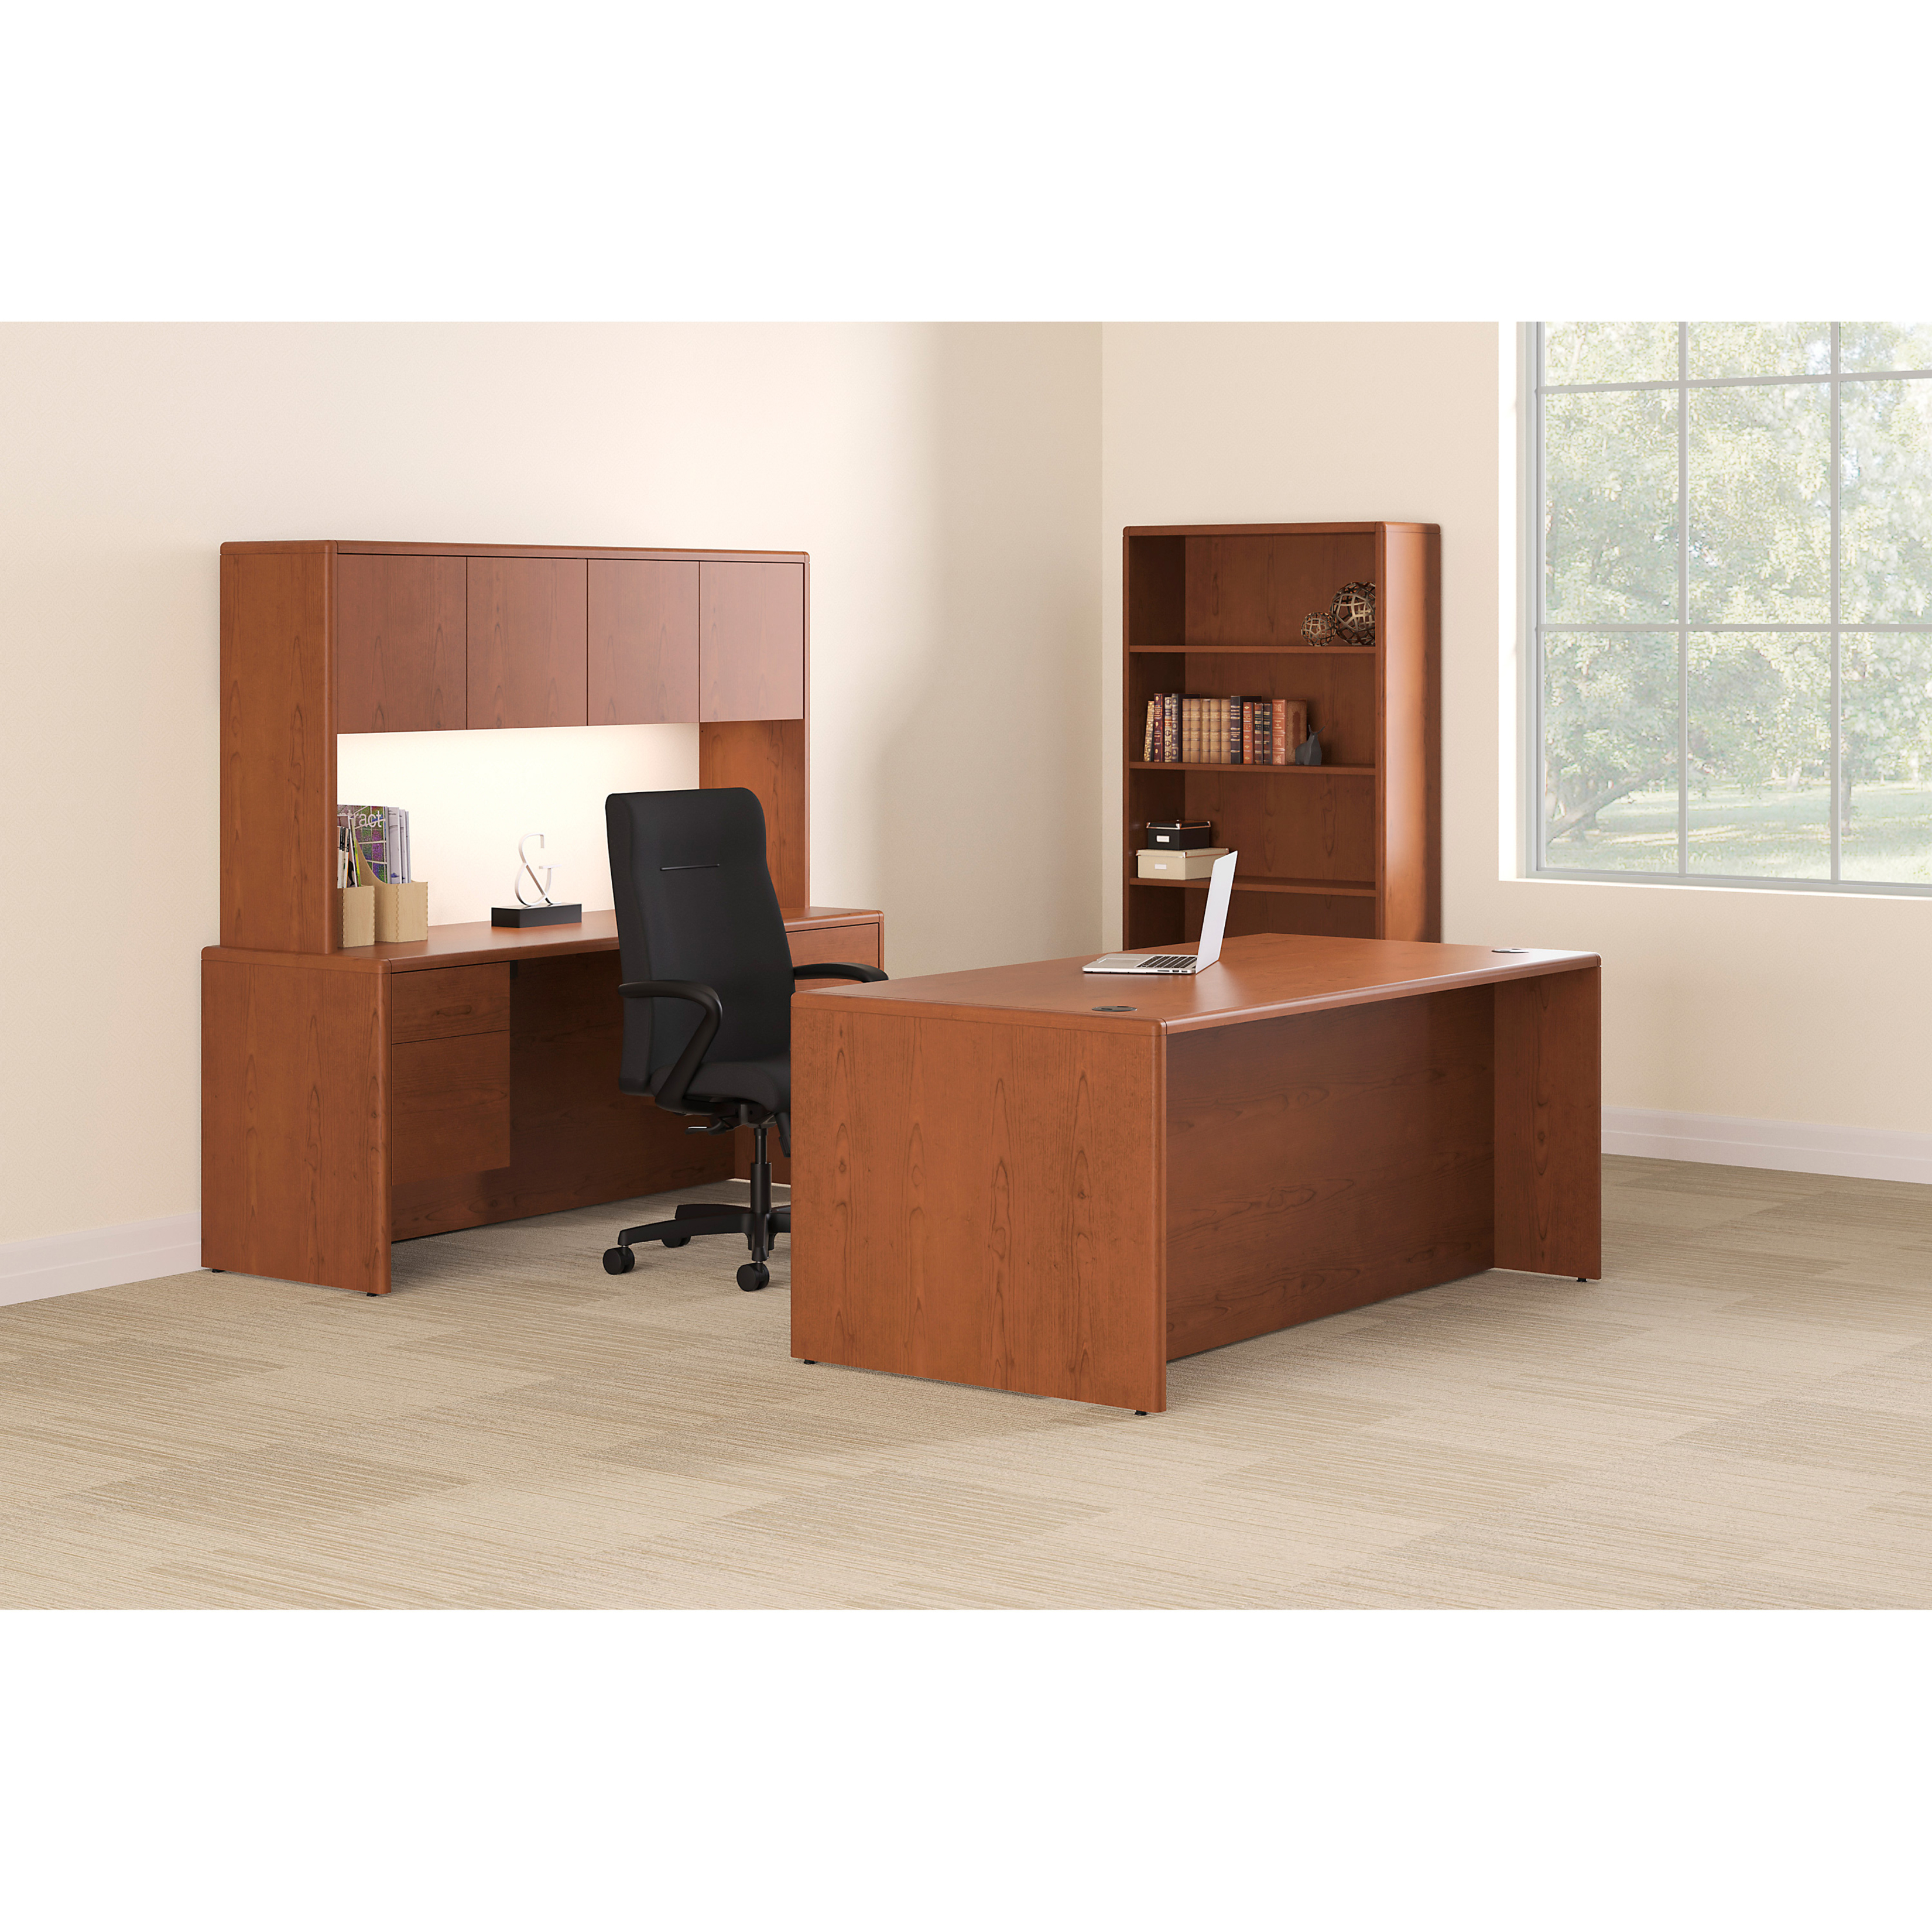 HON 10700 Series Kneespace Credenza, 4-Drawer - image 3 of 3